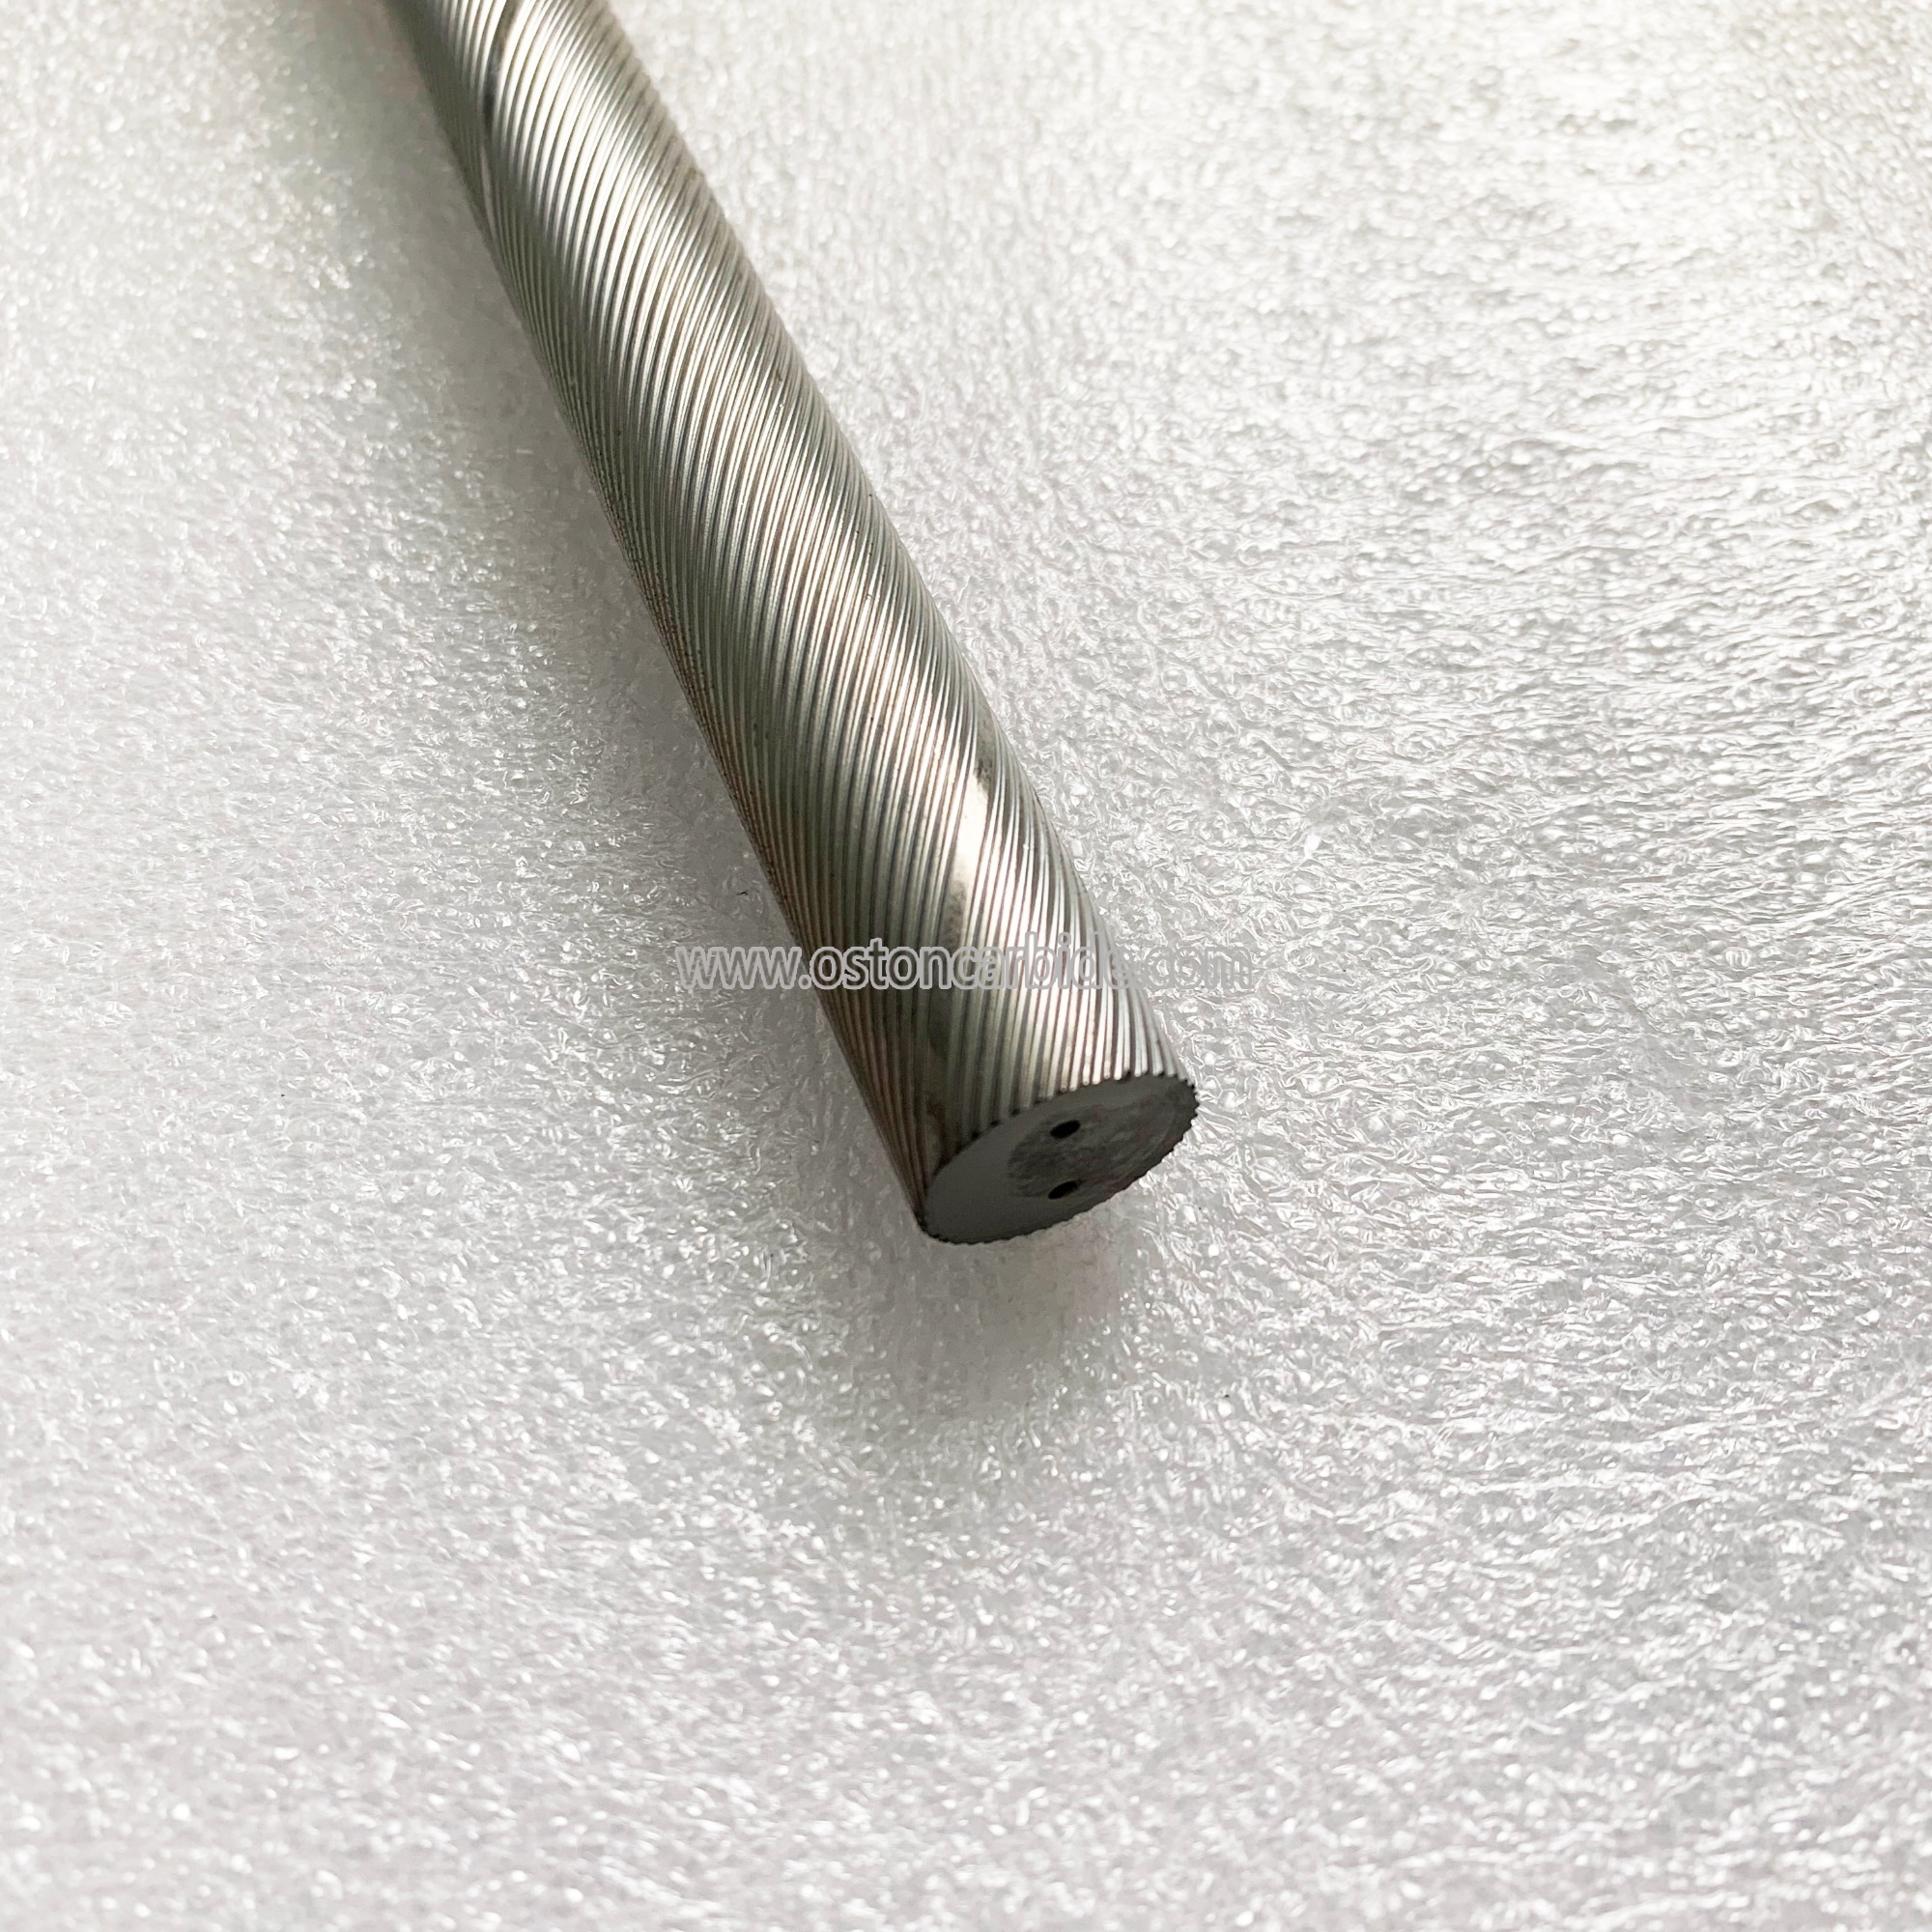 12% Cobalt Tungsten Carbide Round Bar , Hard Alloy Round Bar With Two Spiral Holes For Carbide Cutting Tools